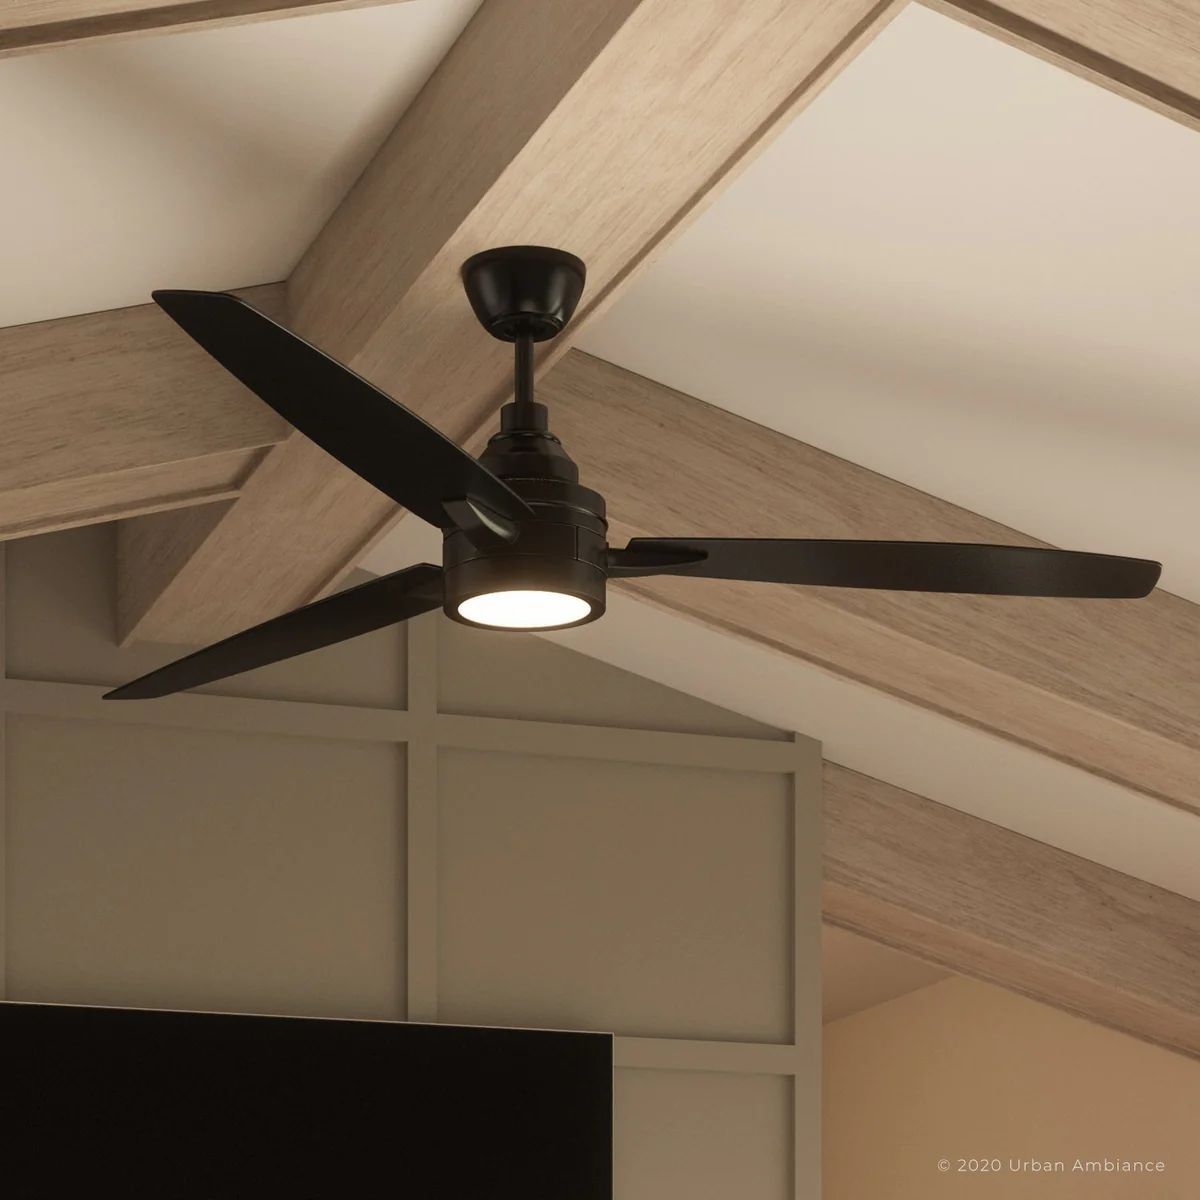 UHP9040 Mid Century Modern  Indoor Ceiling Fan, 13.1"H x 60"W, Midnight Black, Tybee Collection | Urban Ambiance, Inc.